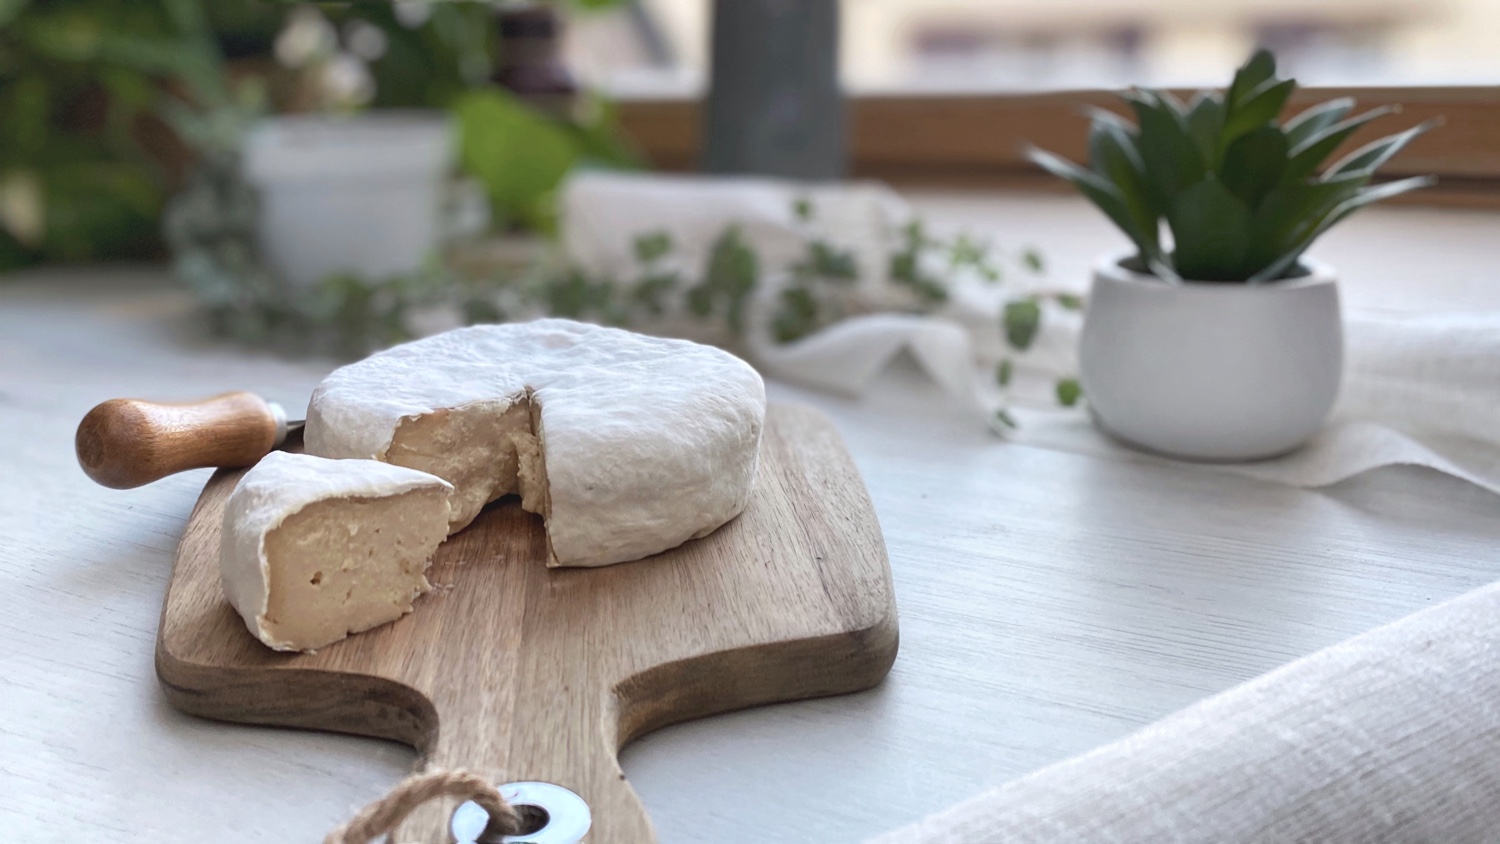 The Ultimate Vegan Cheesemaking Course by Brownble